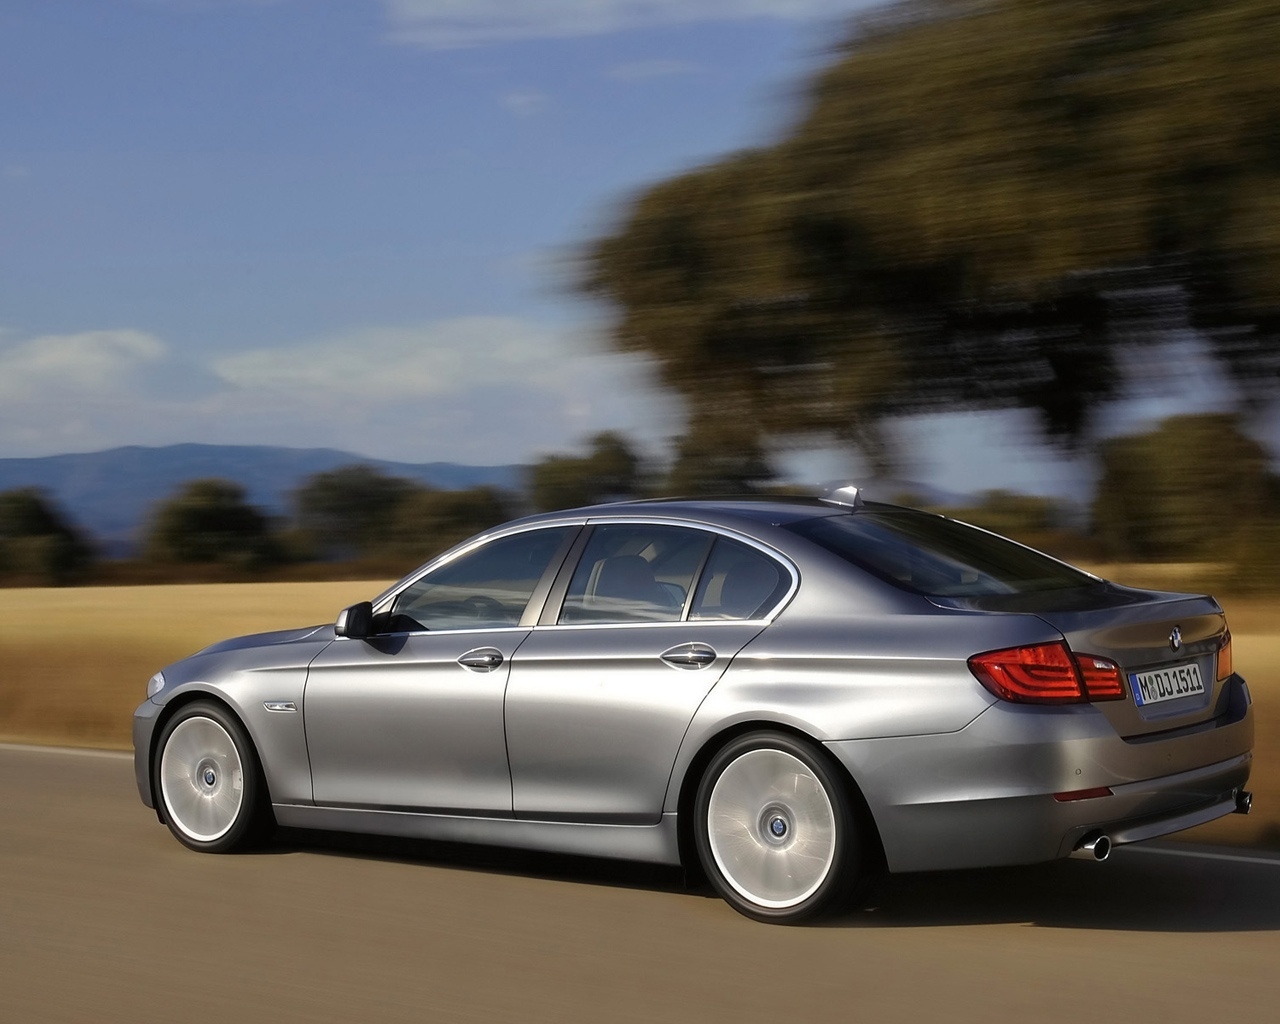 BMW 5 Series Sedan 2010 Rear And Side Speed for 1280 x 1024 resolution